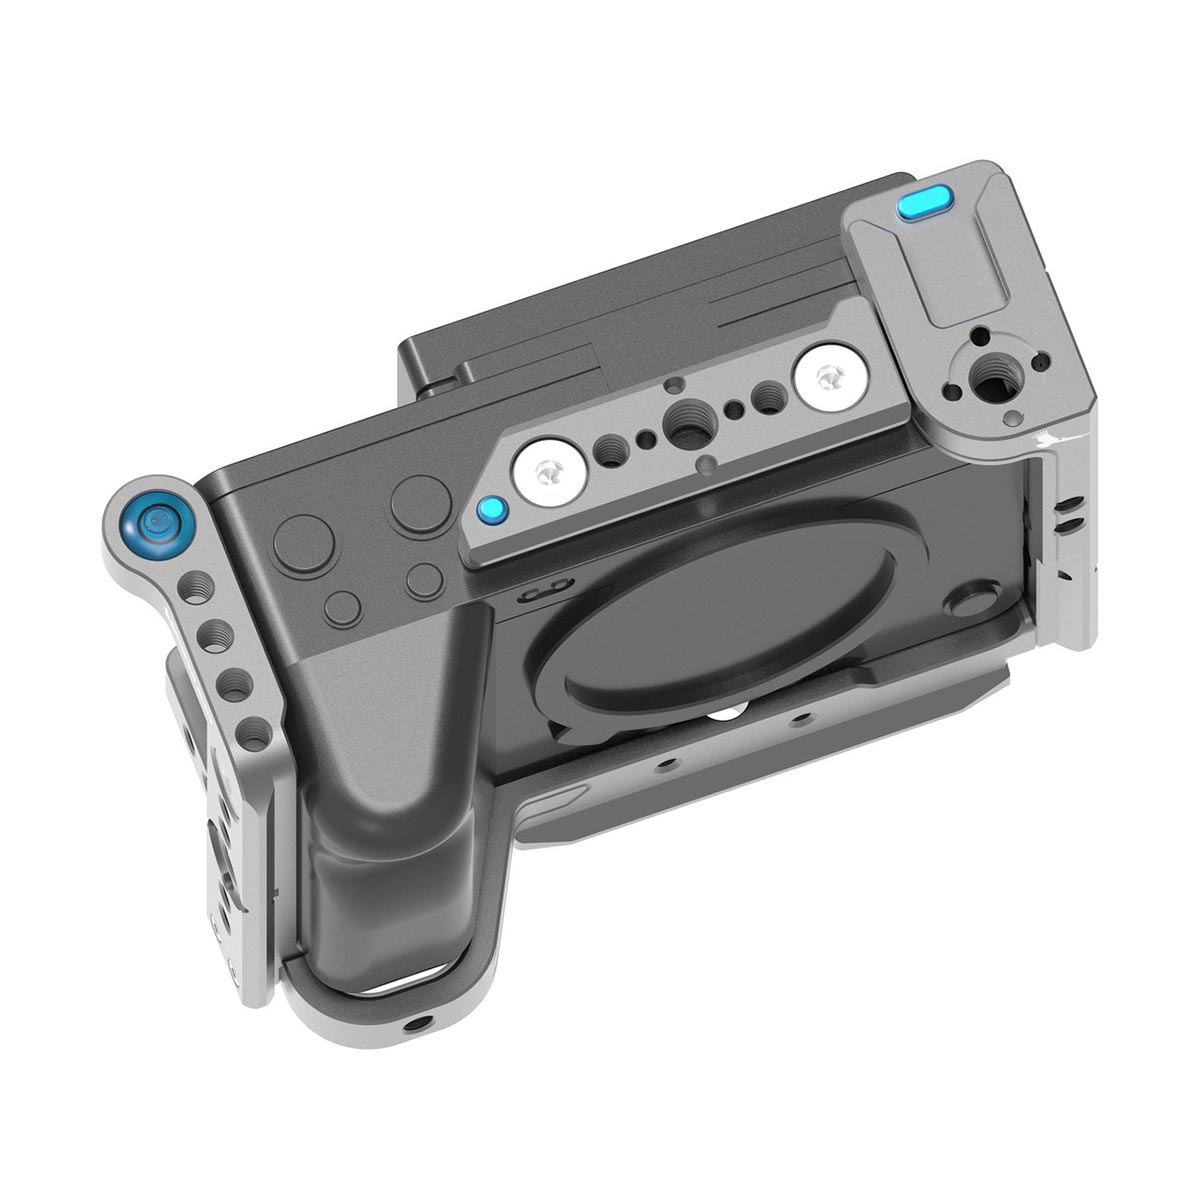 Kondor Blue Cage with Trigger Handle for Sony FX3 (Space Gray)